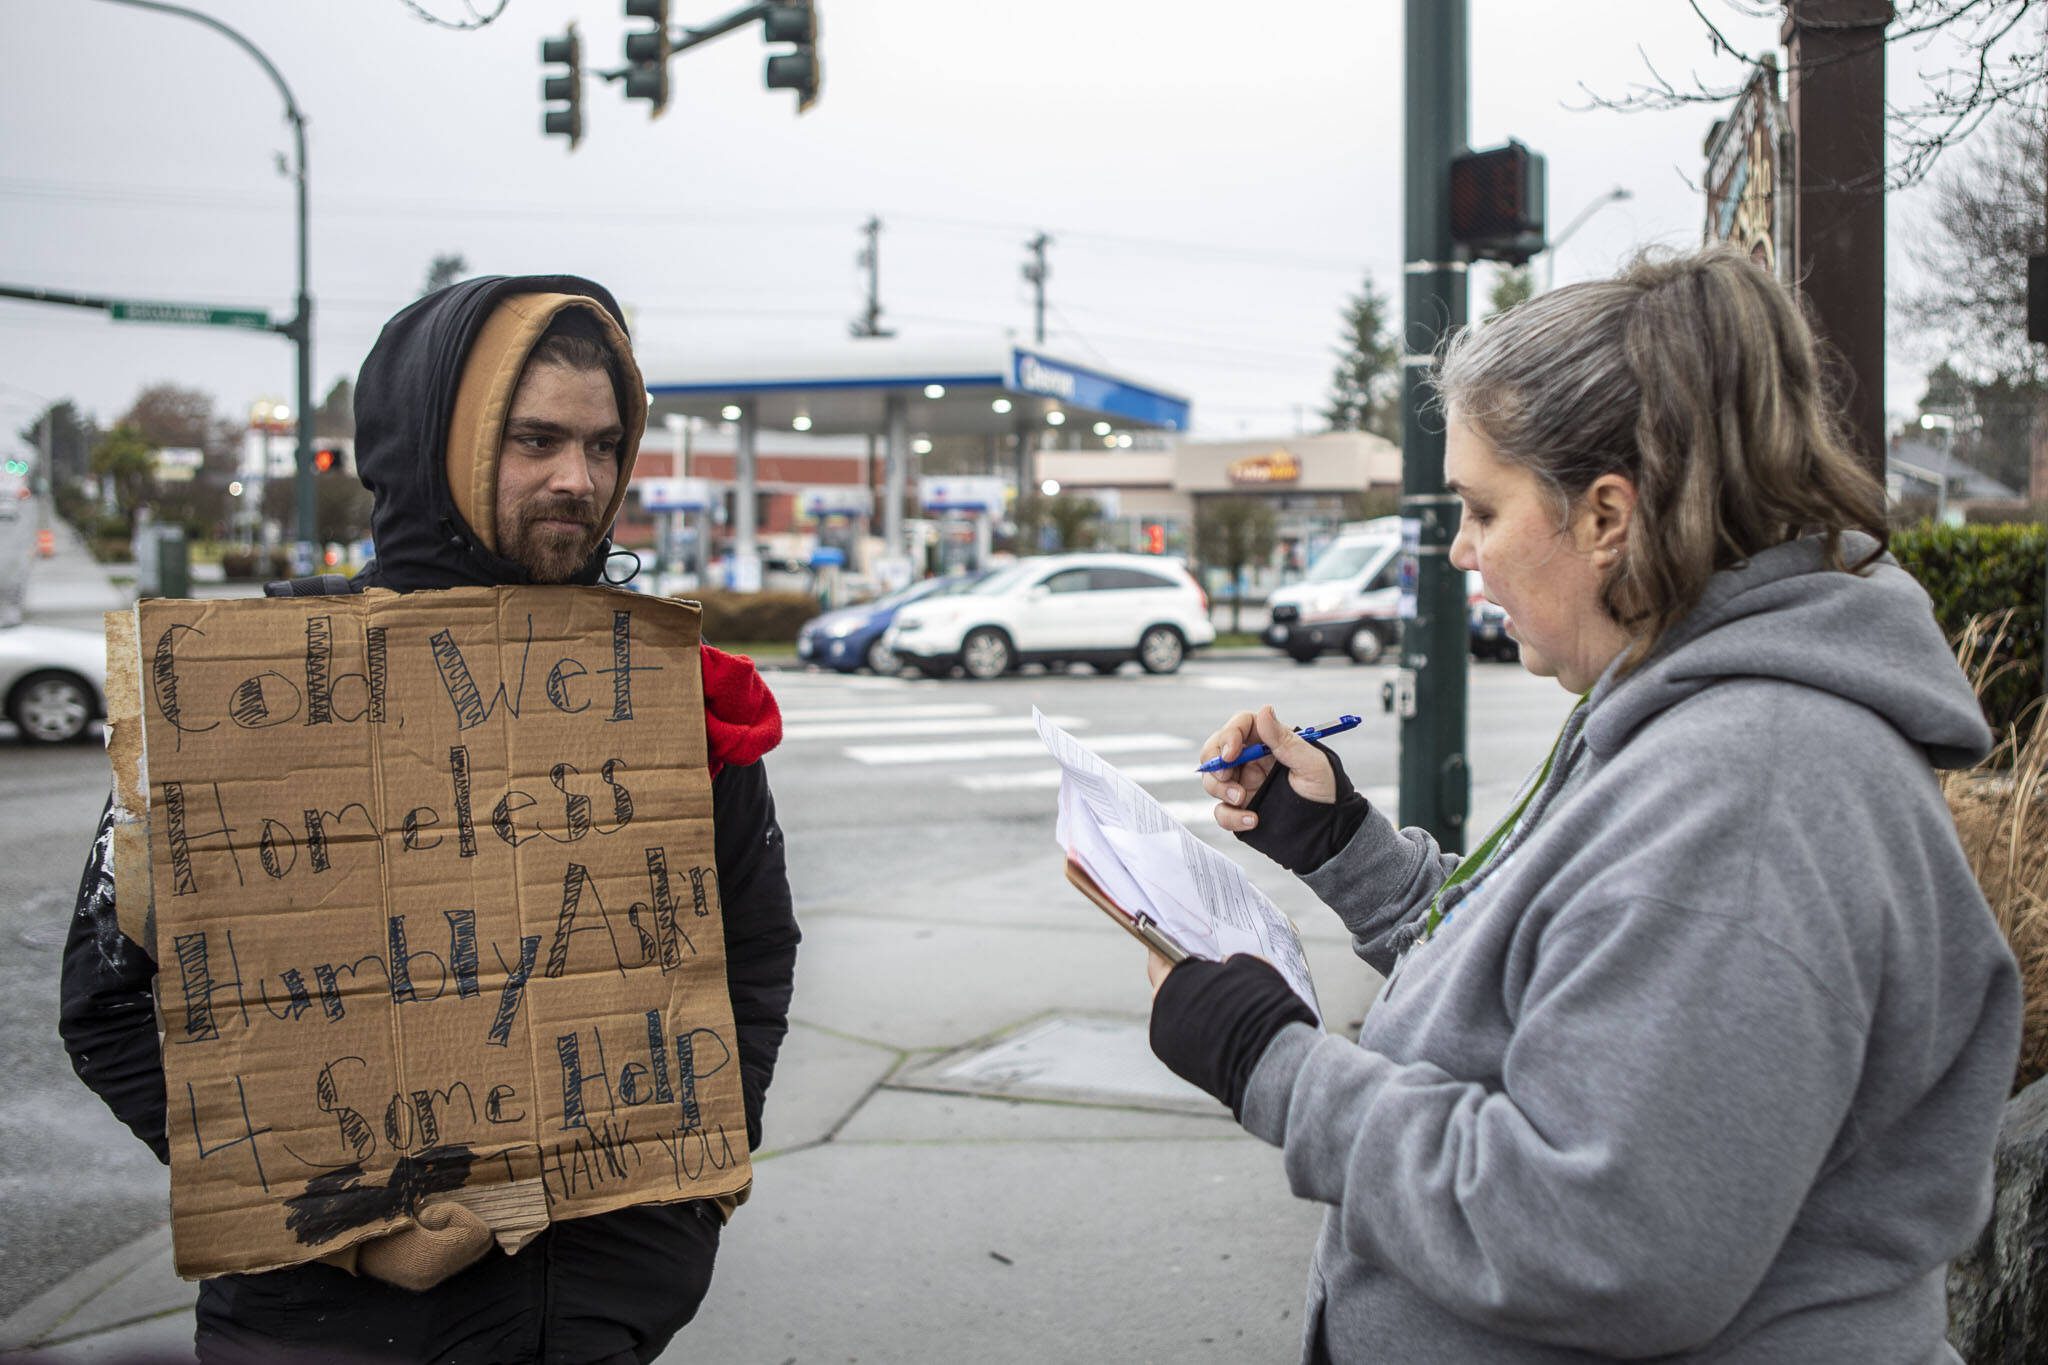 Catholic Community Services NW Director of Housing Services and Everett Family Center Director Rita Jo Case, right, speaks to a man who asked to remain anonymous, left, during a point-in-time count of people facing homelessness in Everett, Washington on Tuesday, Jan. 24, 2023. (Annie Barker / The Herald)